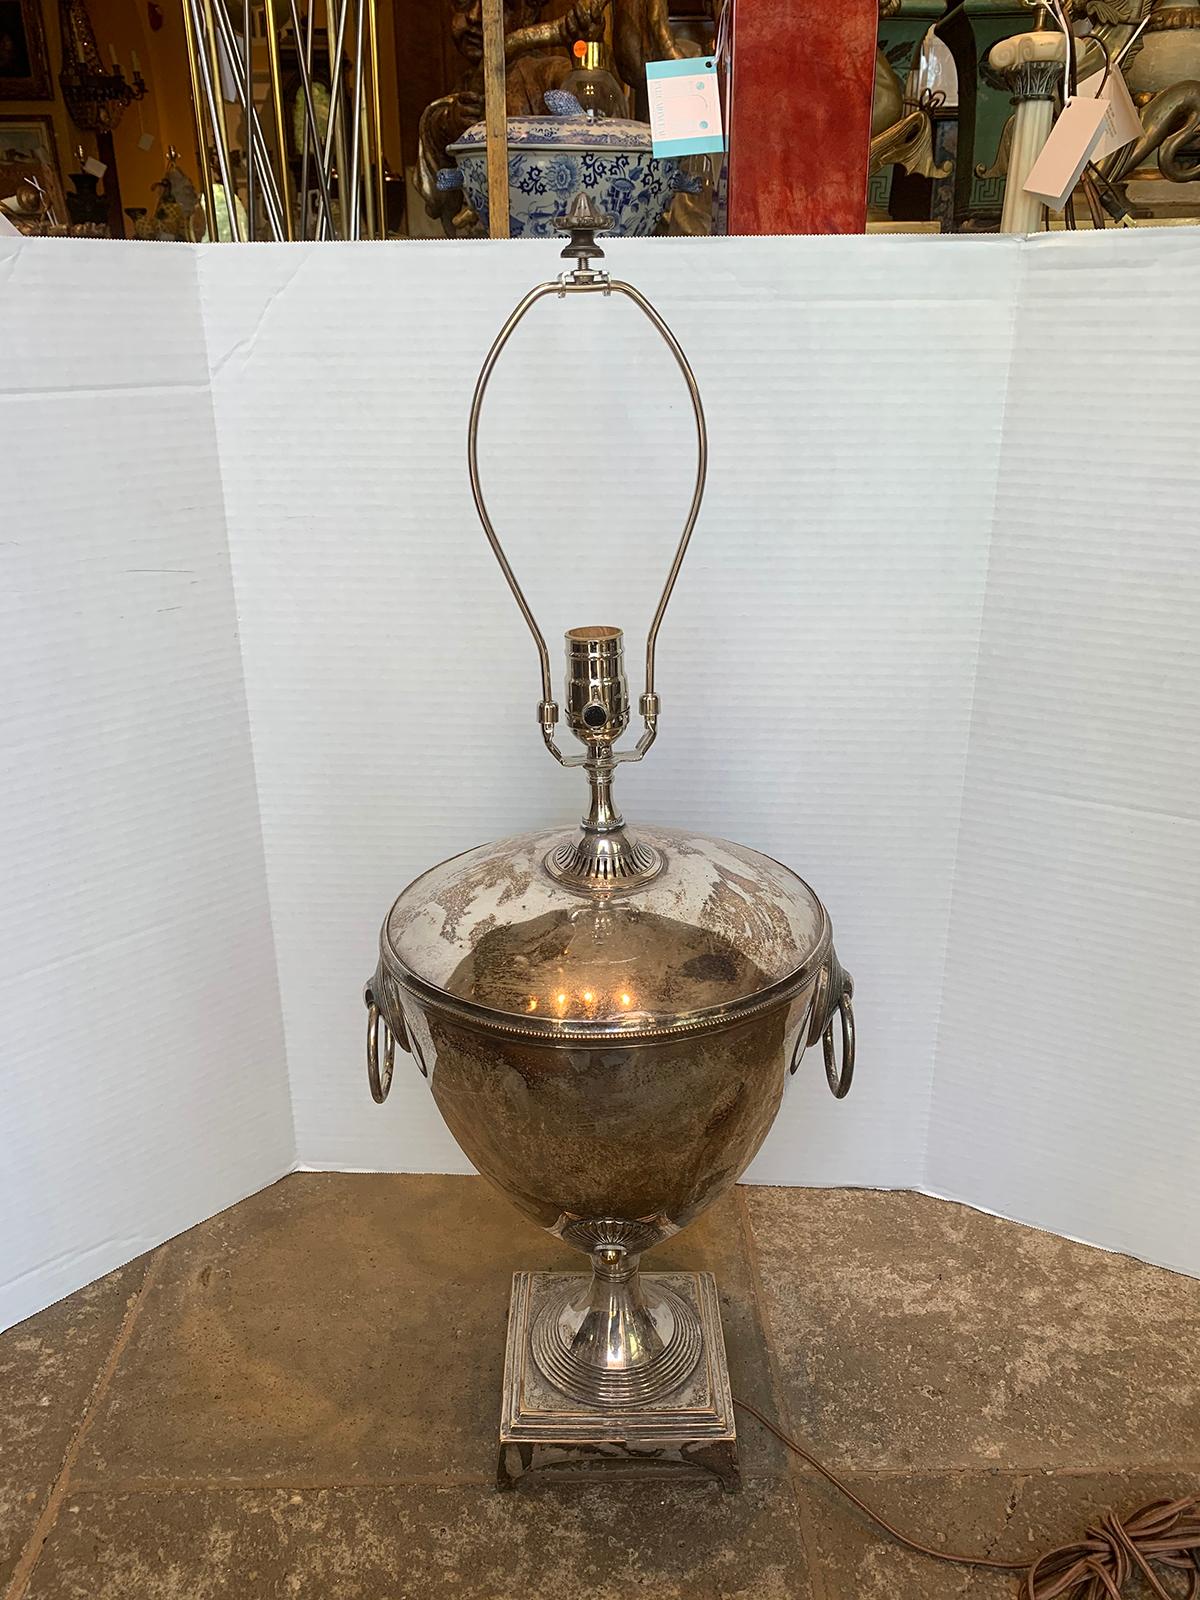 19th century English Sheffield silver plate hot water urn as lamp
New wiring.